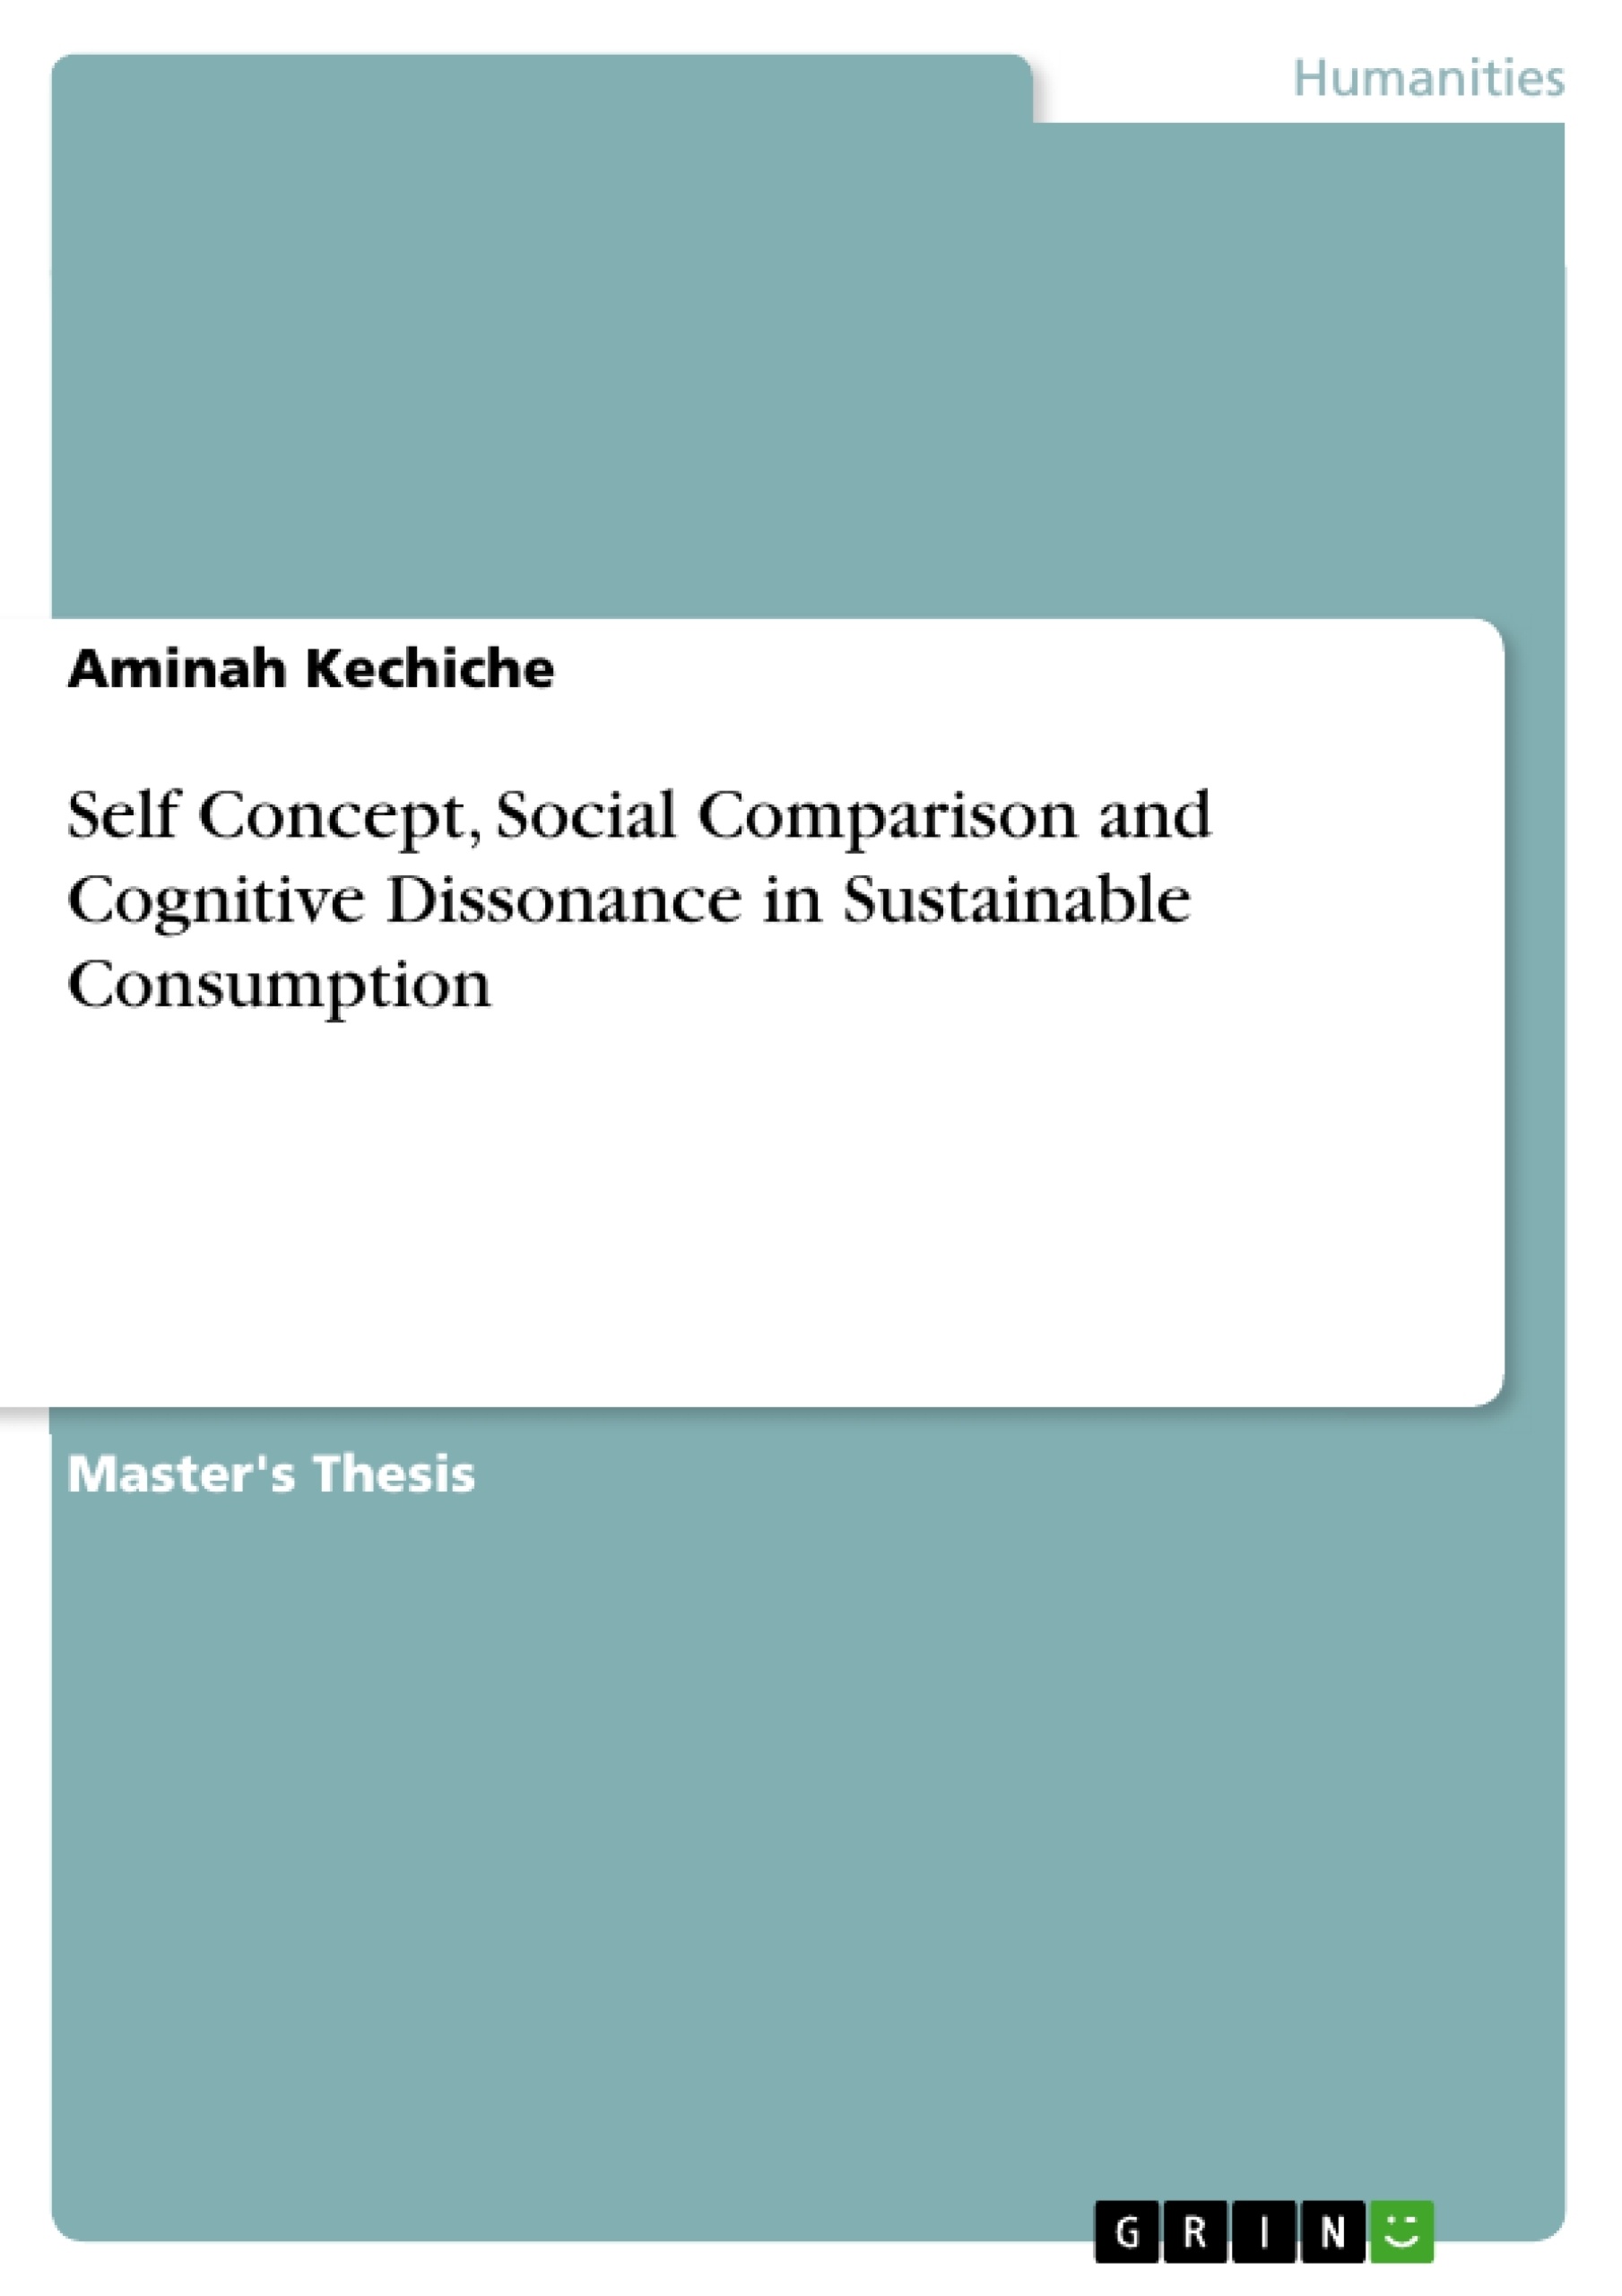 Title: Self Concept, Social Comparison and Cognitive Dissonance in Sustainable Consumption